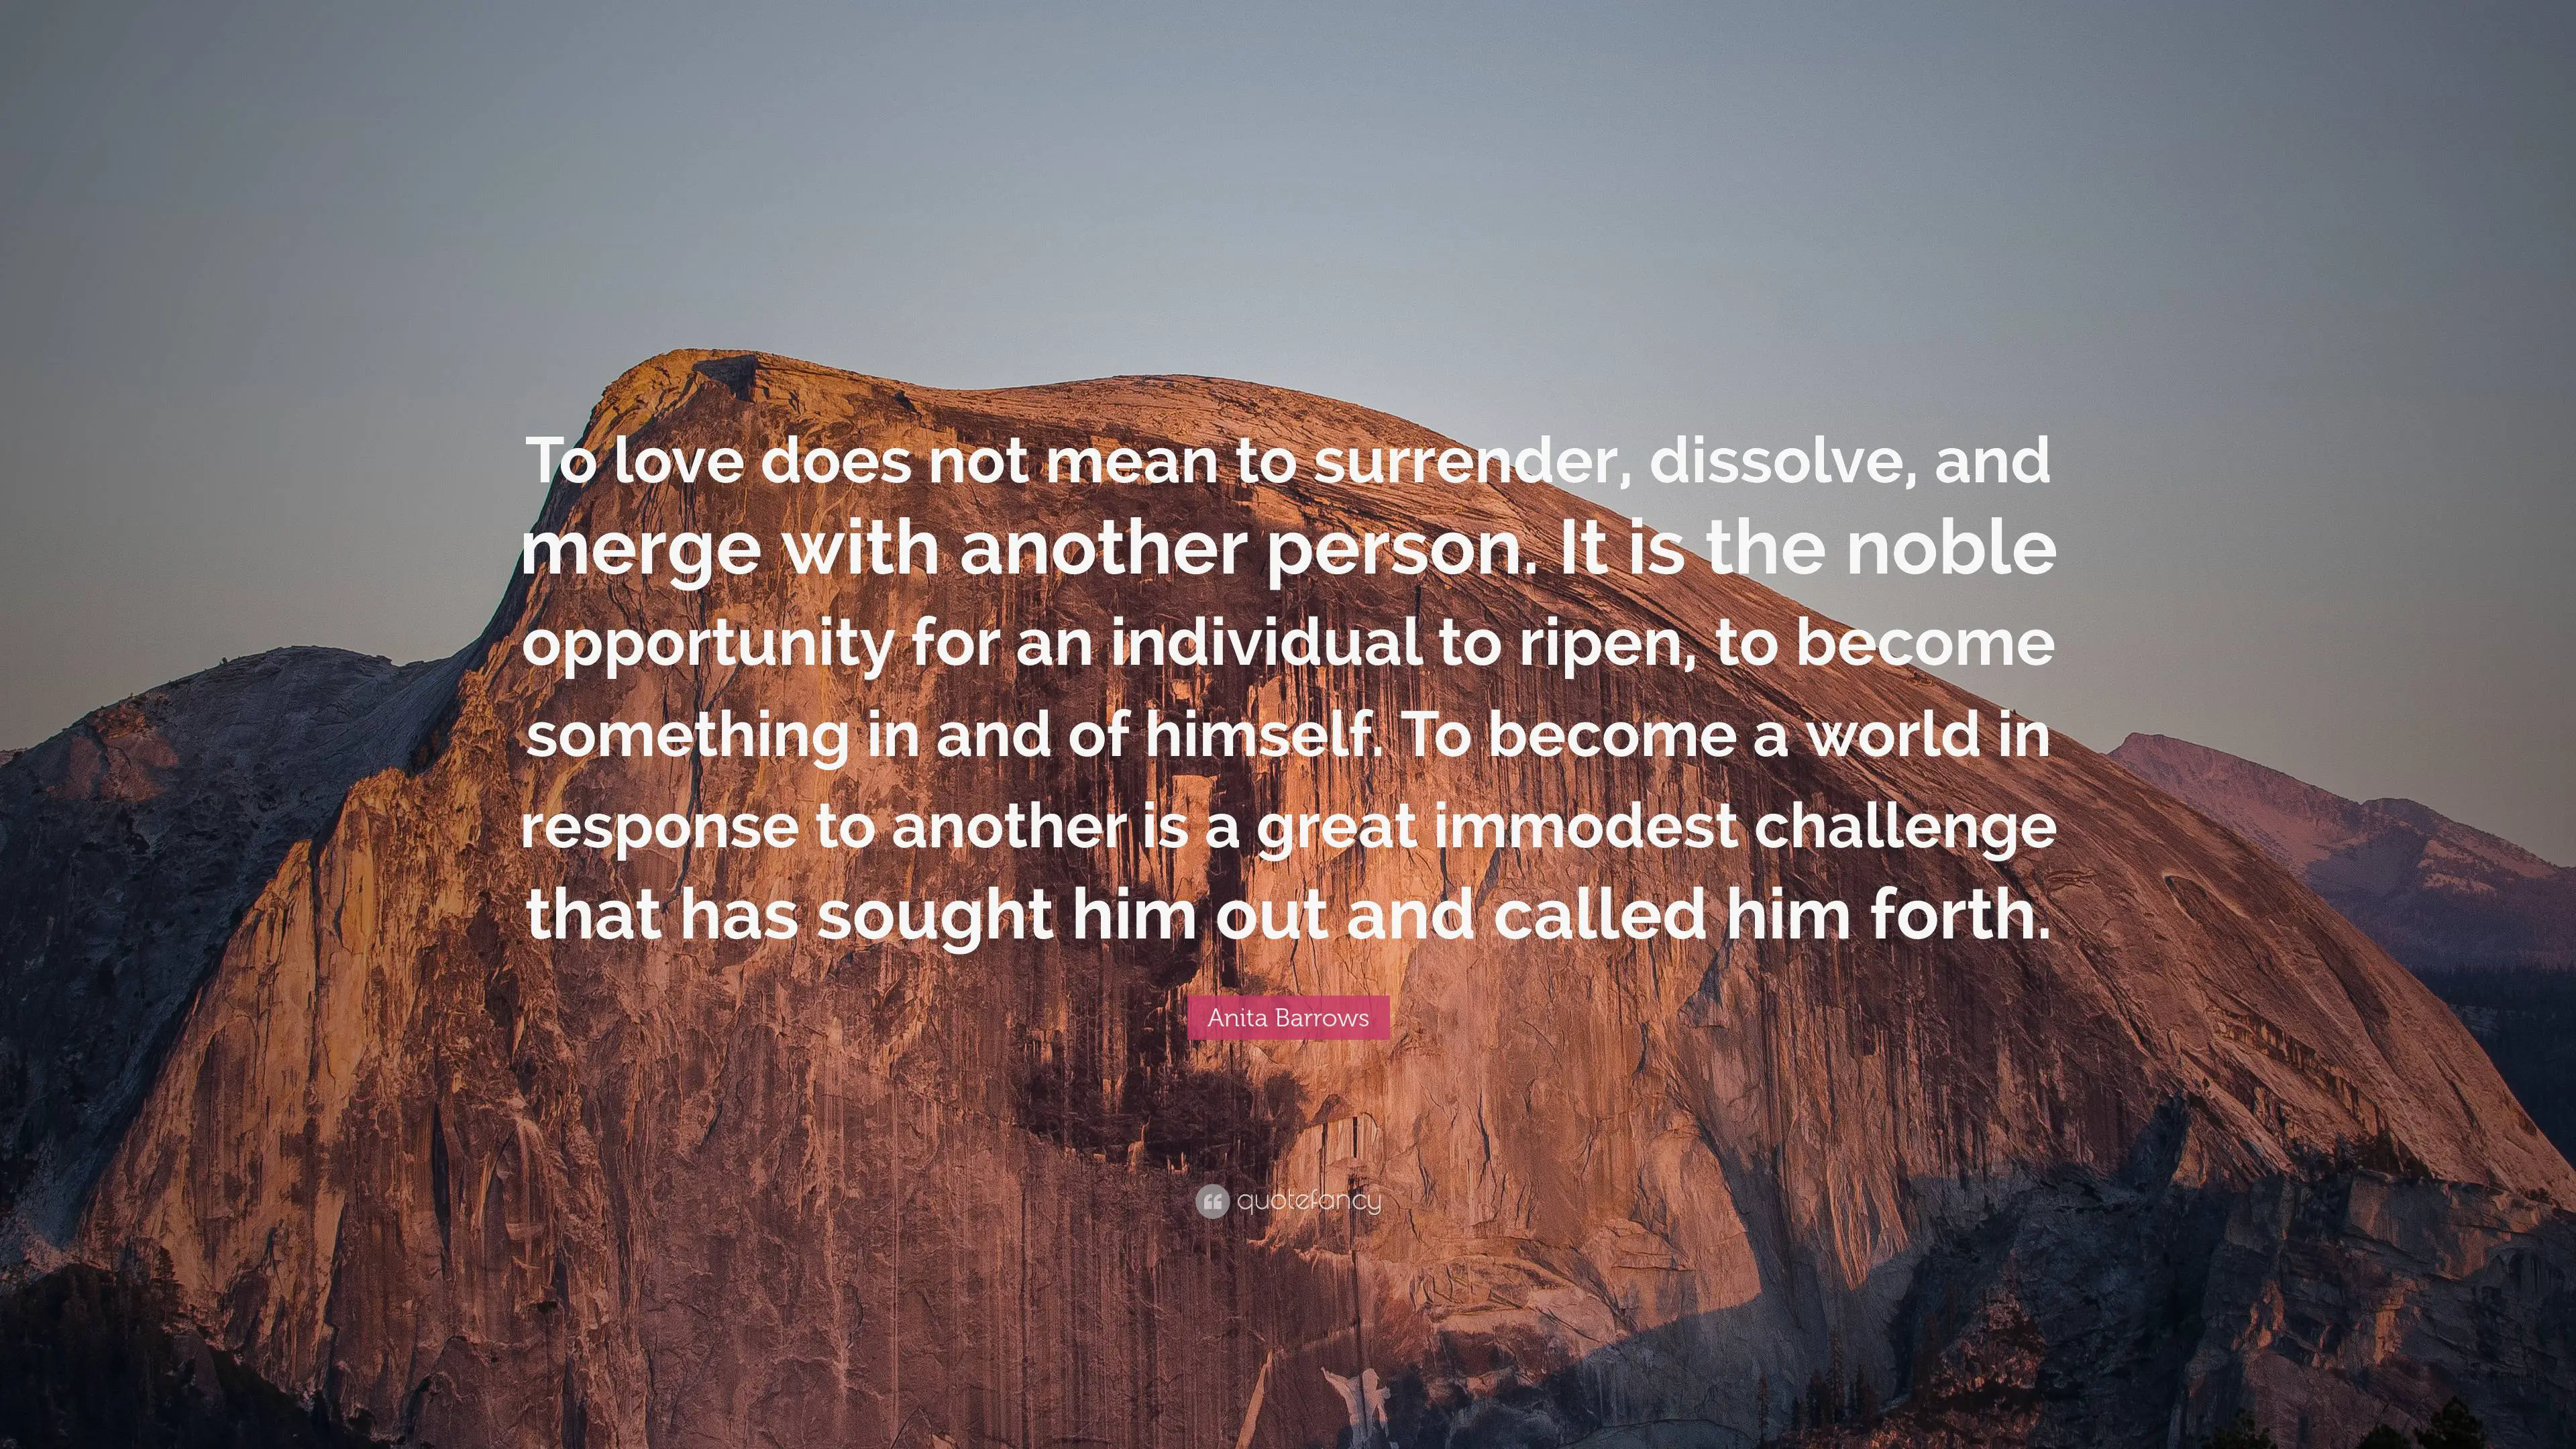 5 Geologist Quotes About Love